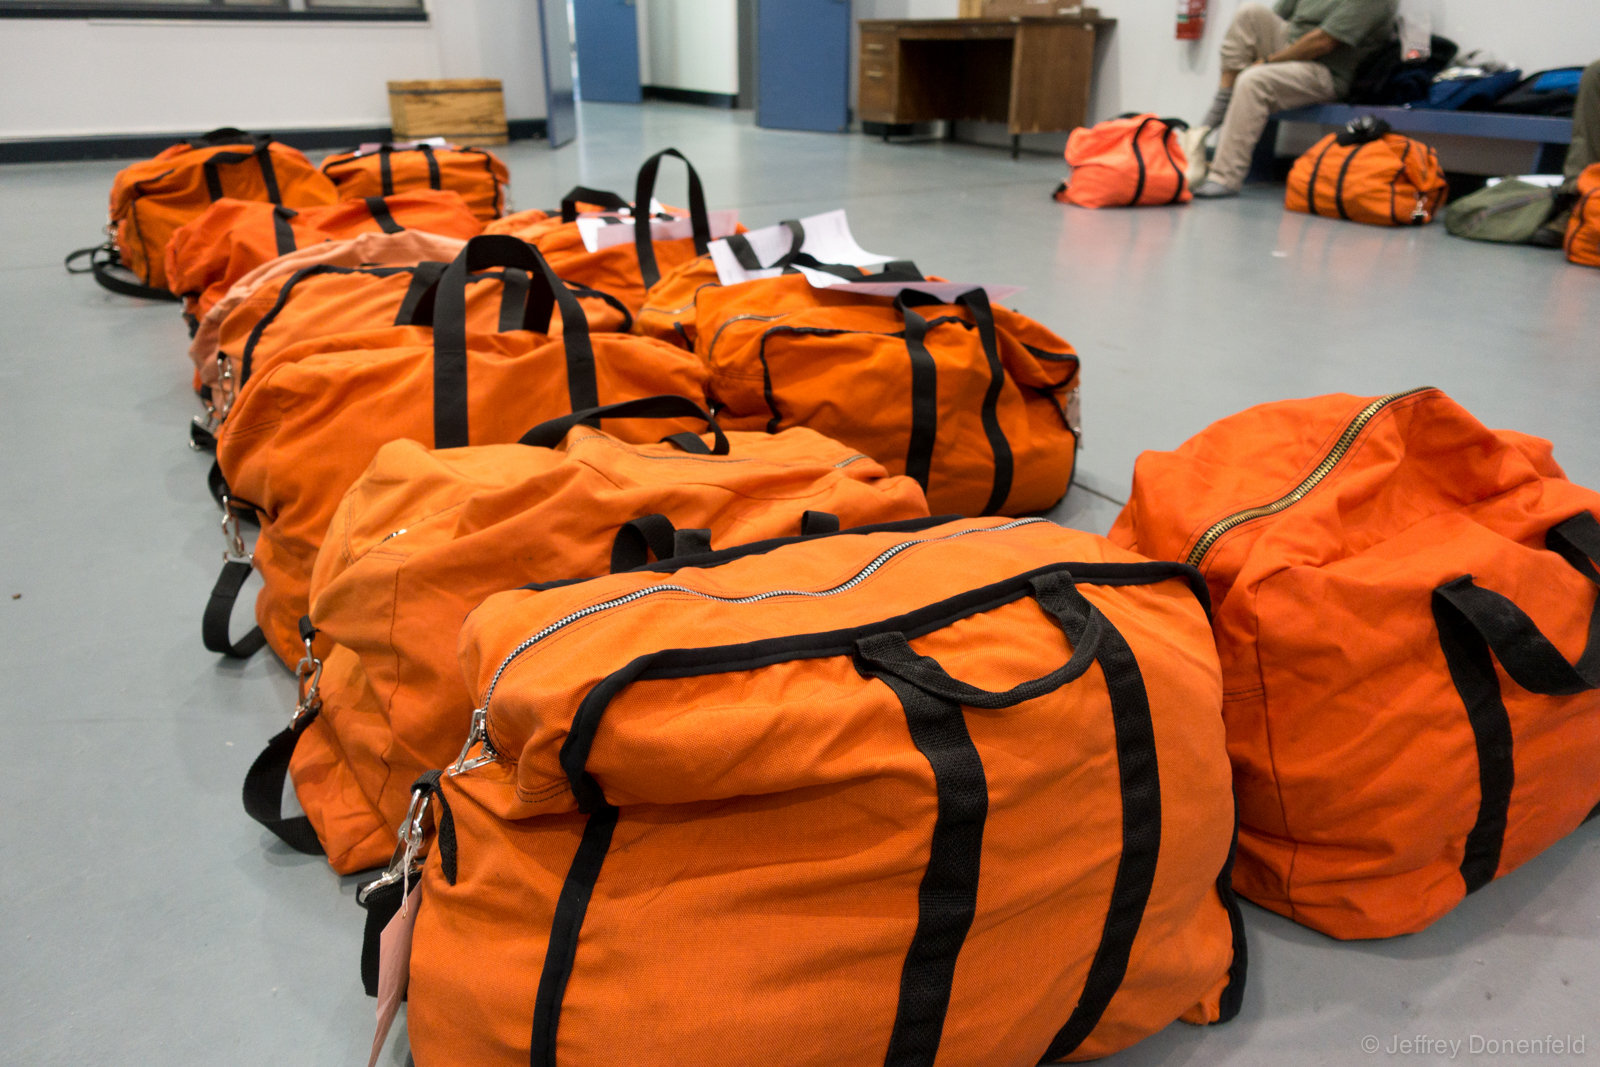 These orange bags are called "boomerang bags", and are used for gear storage, checkin bags, as well as carry on bags. In Antarctica they're used for just about everything, since everybody is issued at least two.